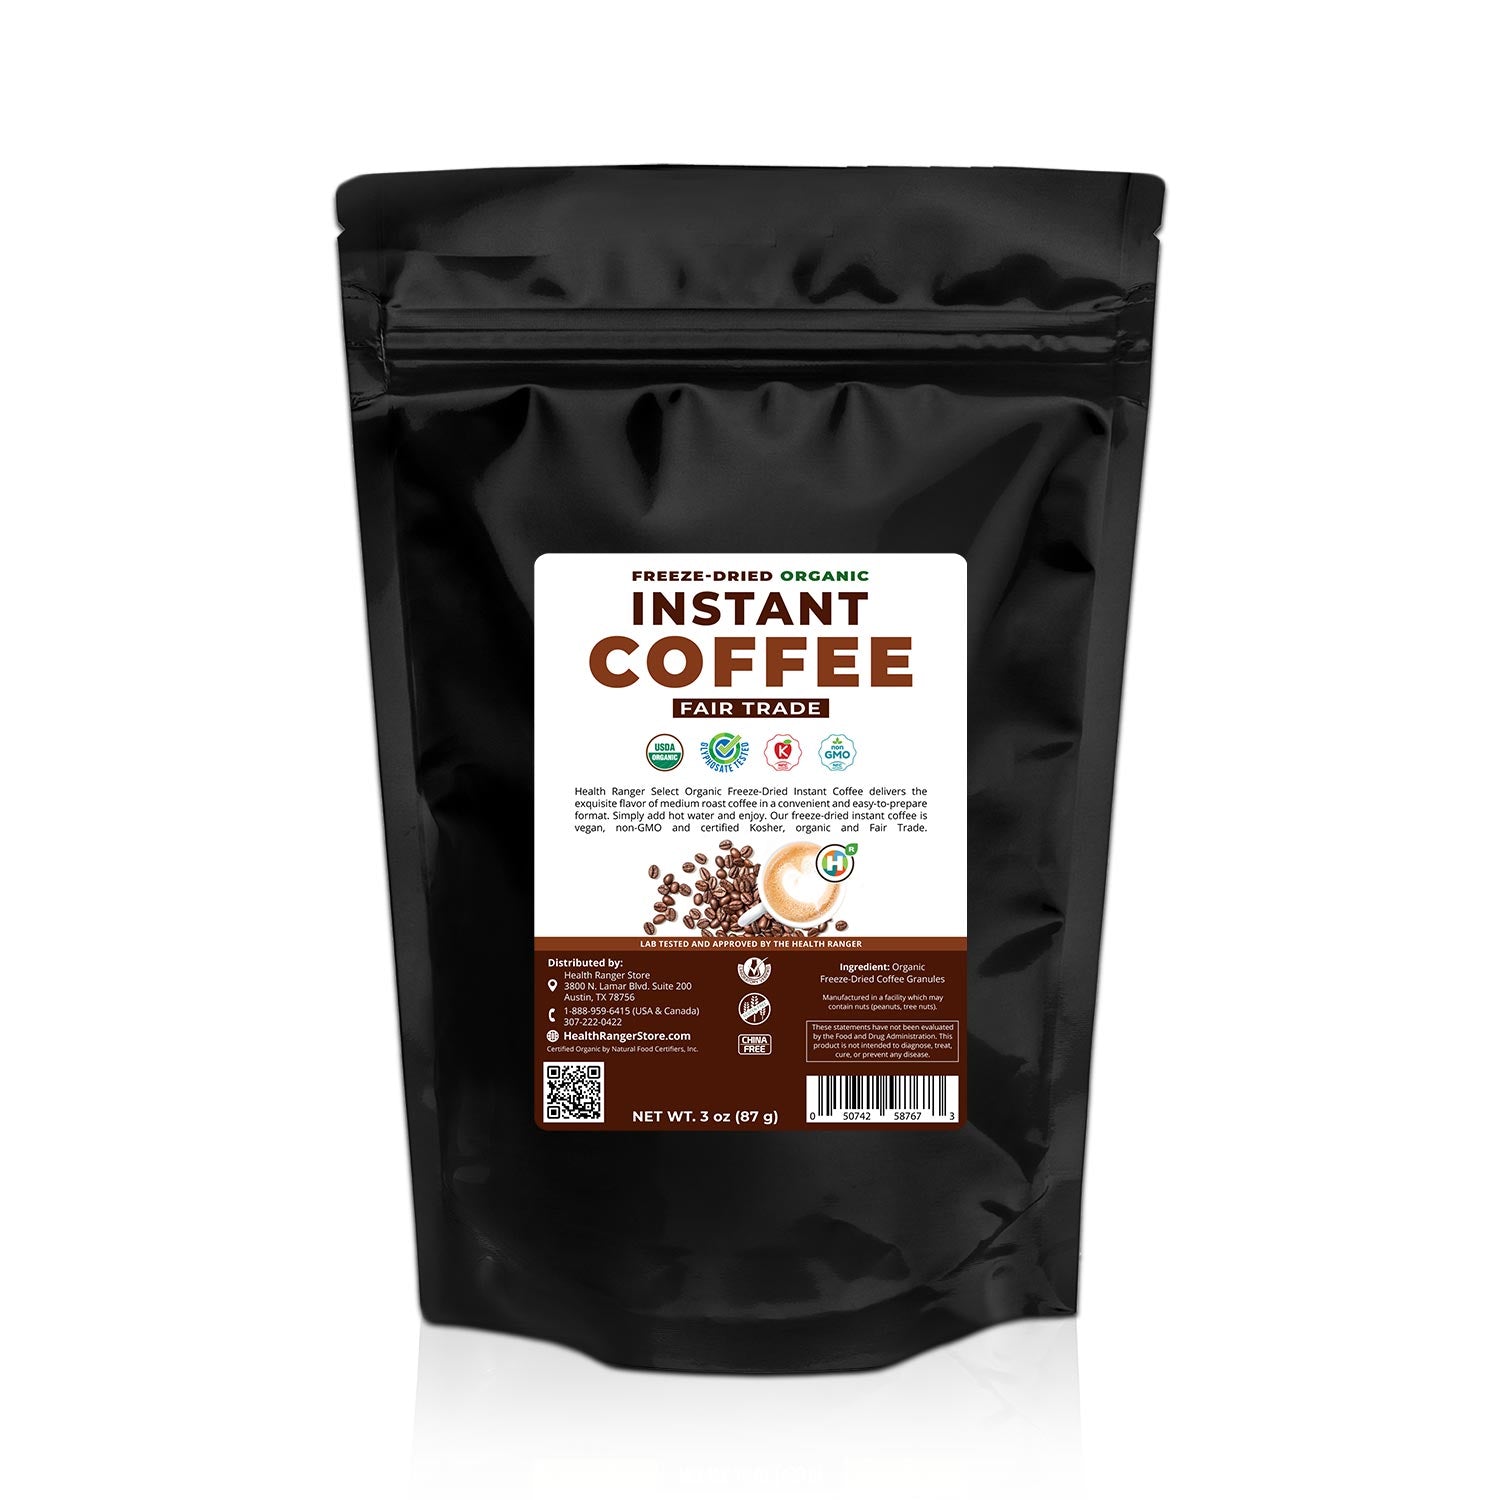 Fair Trade Organic Freeze-Dried Instant Coffee 3oz (87g) (3-Pack)